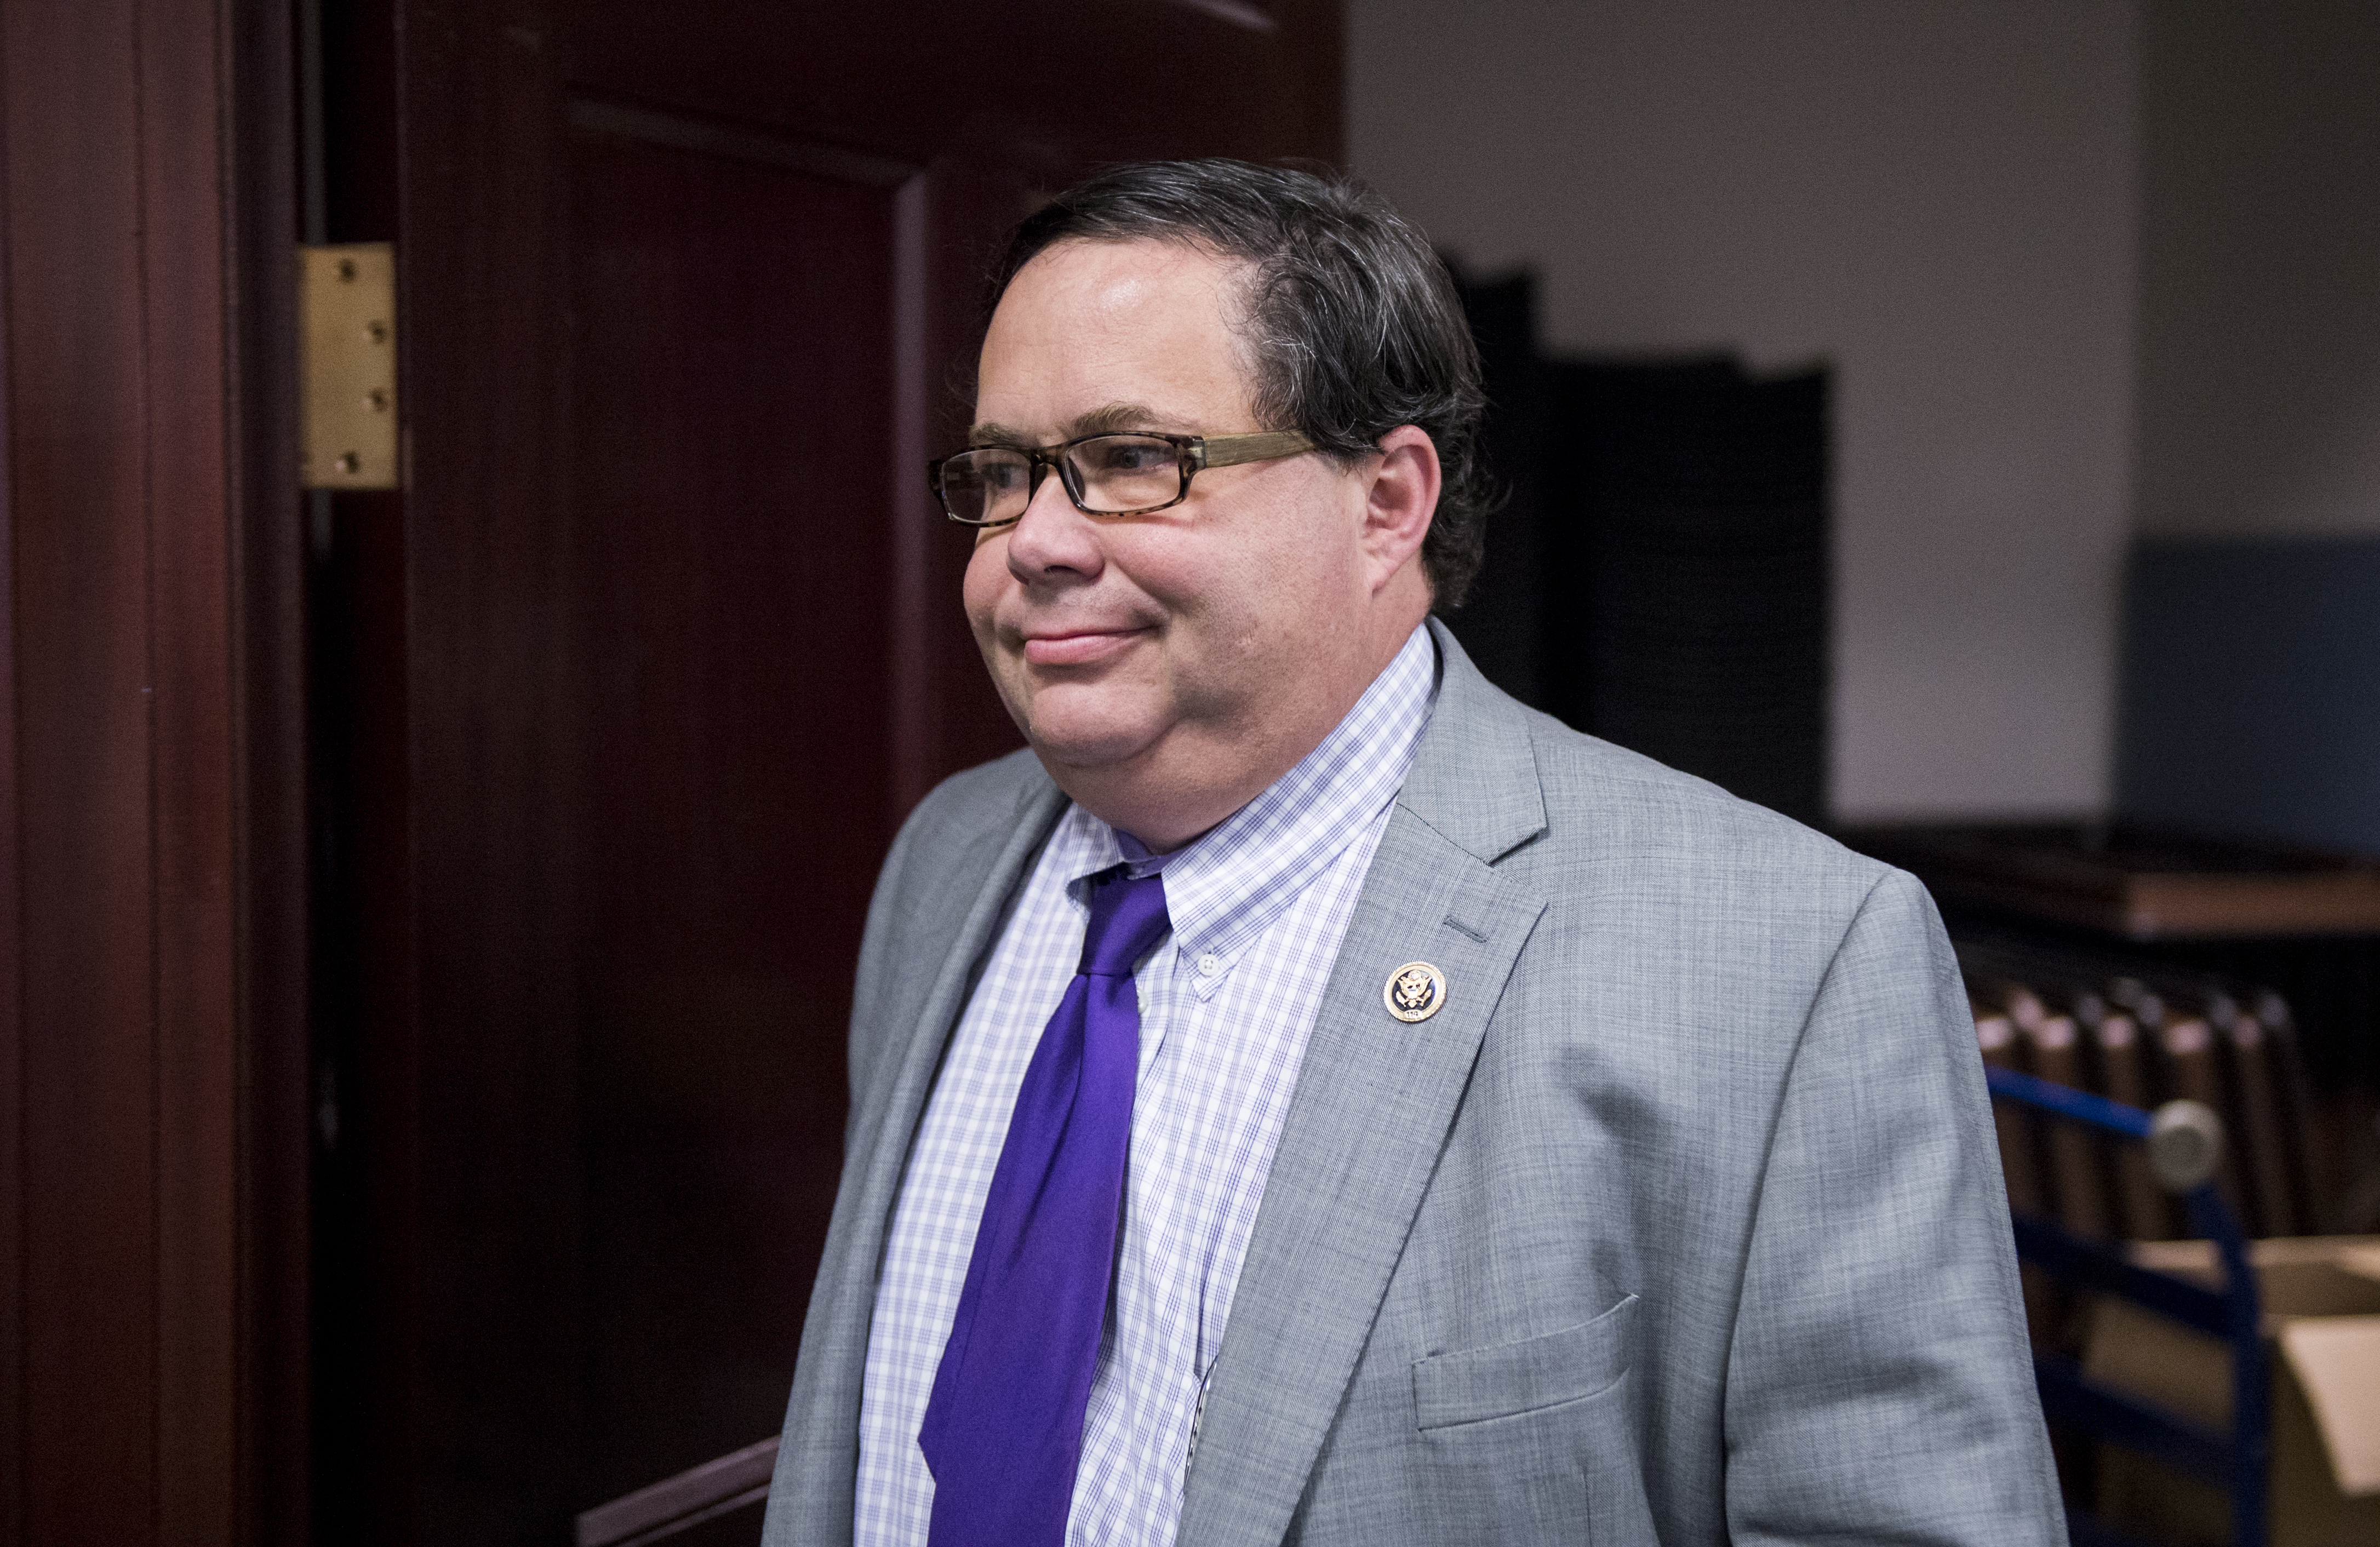 Rep. Blake Farenthold, R-Texas, leaves the House Republican Conference meeting in the basement of the U.S. Capitol on Tuesday, Sept. 29, 2015. (Bill Clark—CQ-Roll Call,Inc./Getty Images)